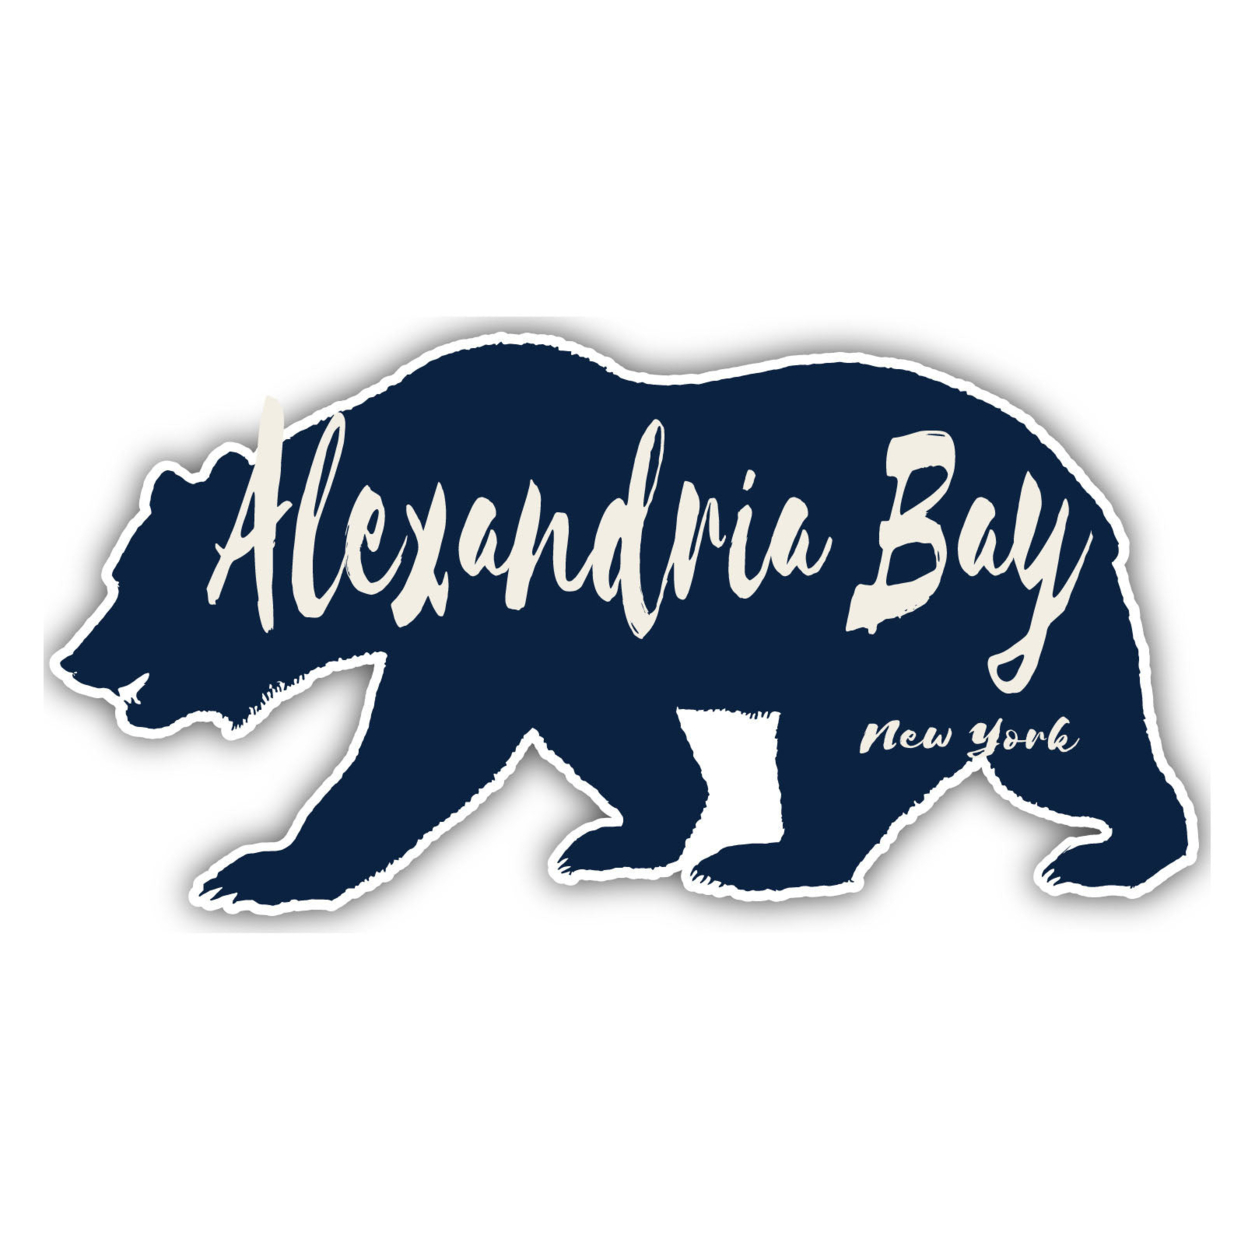 Alexandria Bay New York Souvenir Decorative Stickers (Choose Theme And Size) - 4-Pack, 10-Inch, Bear